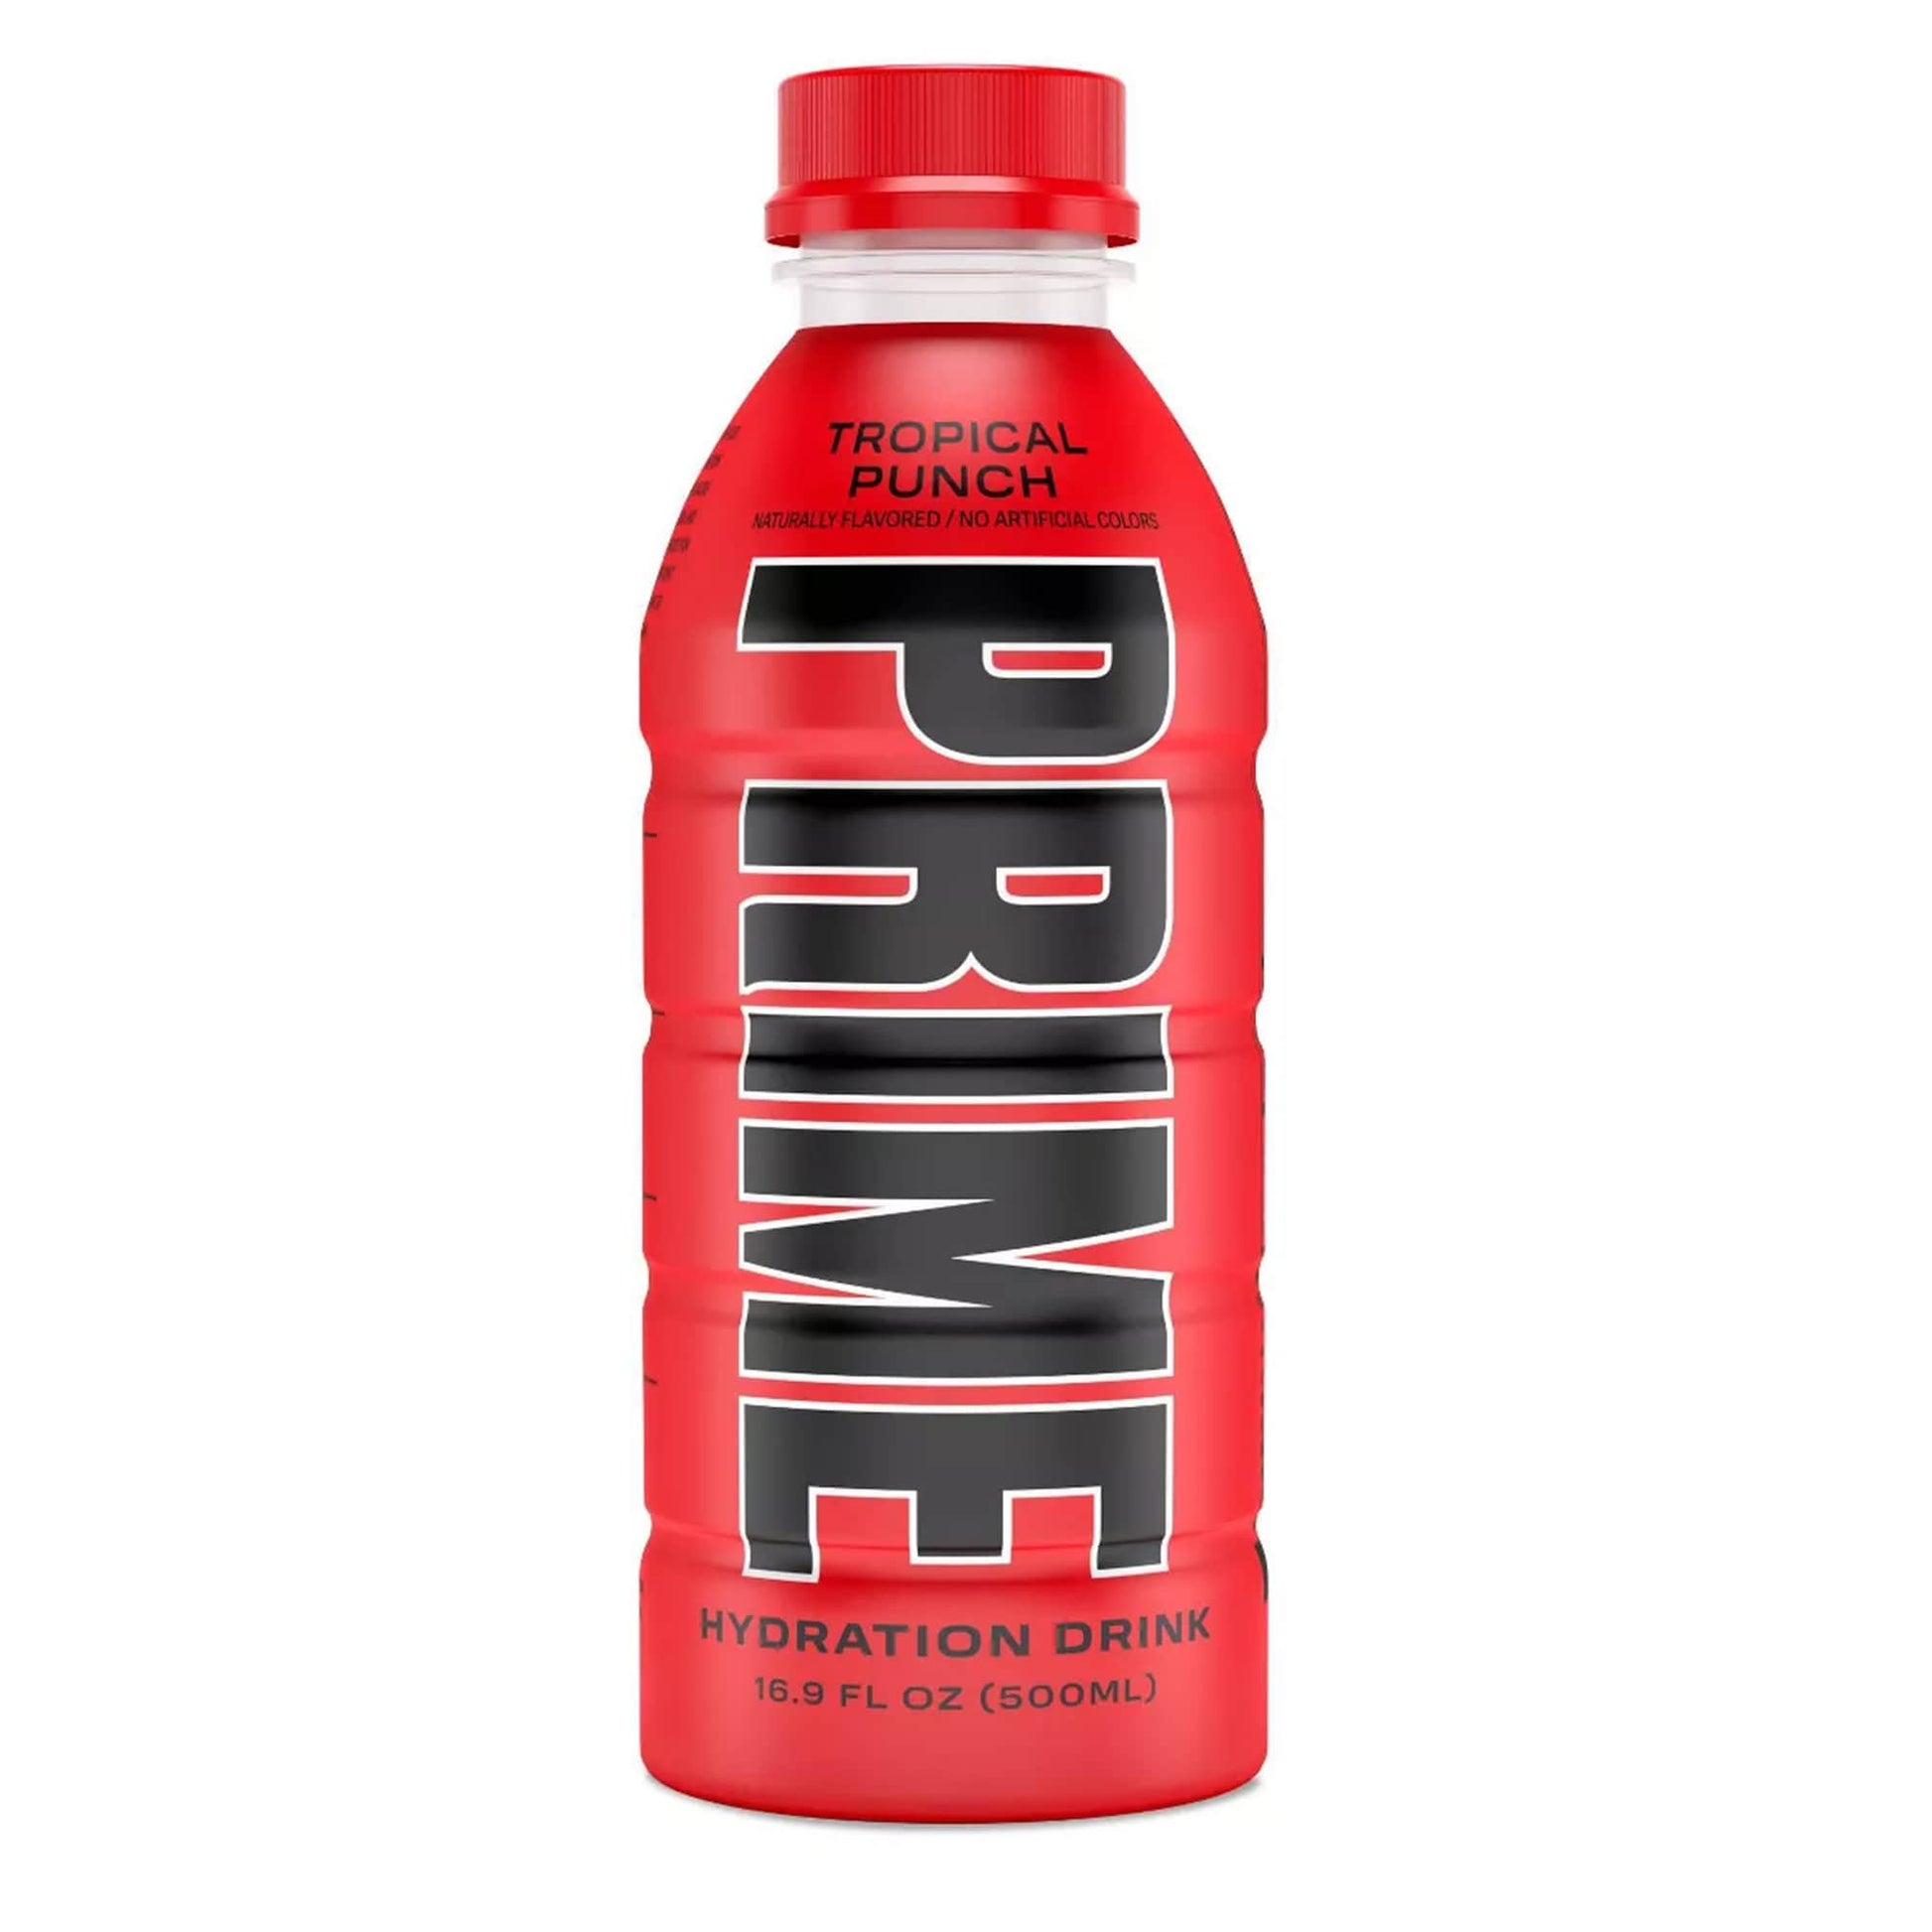 Prime Hydration Drink Tropical Punch, Sports Drink 16.9 oz.-0